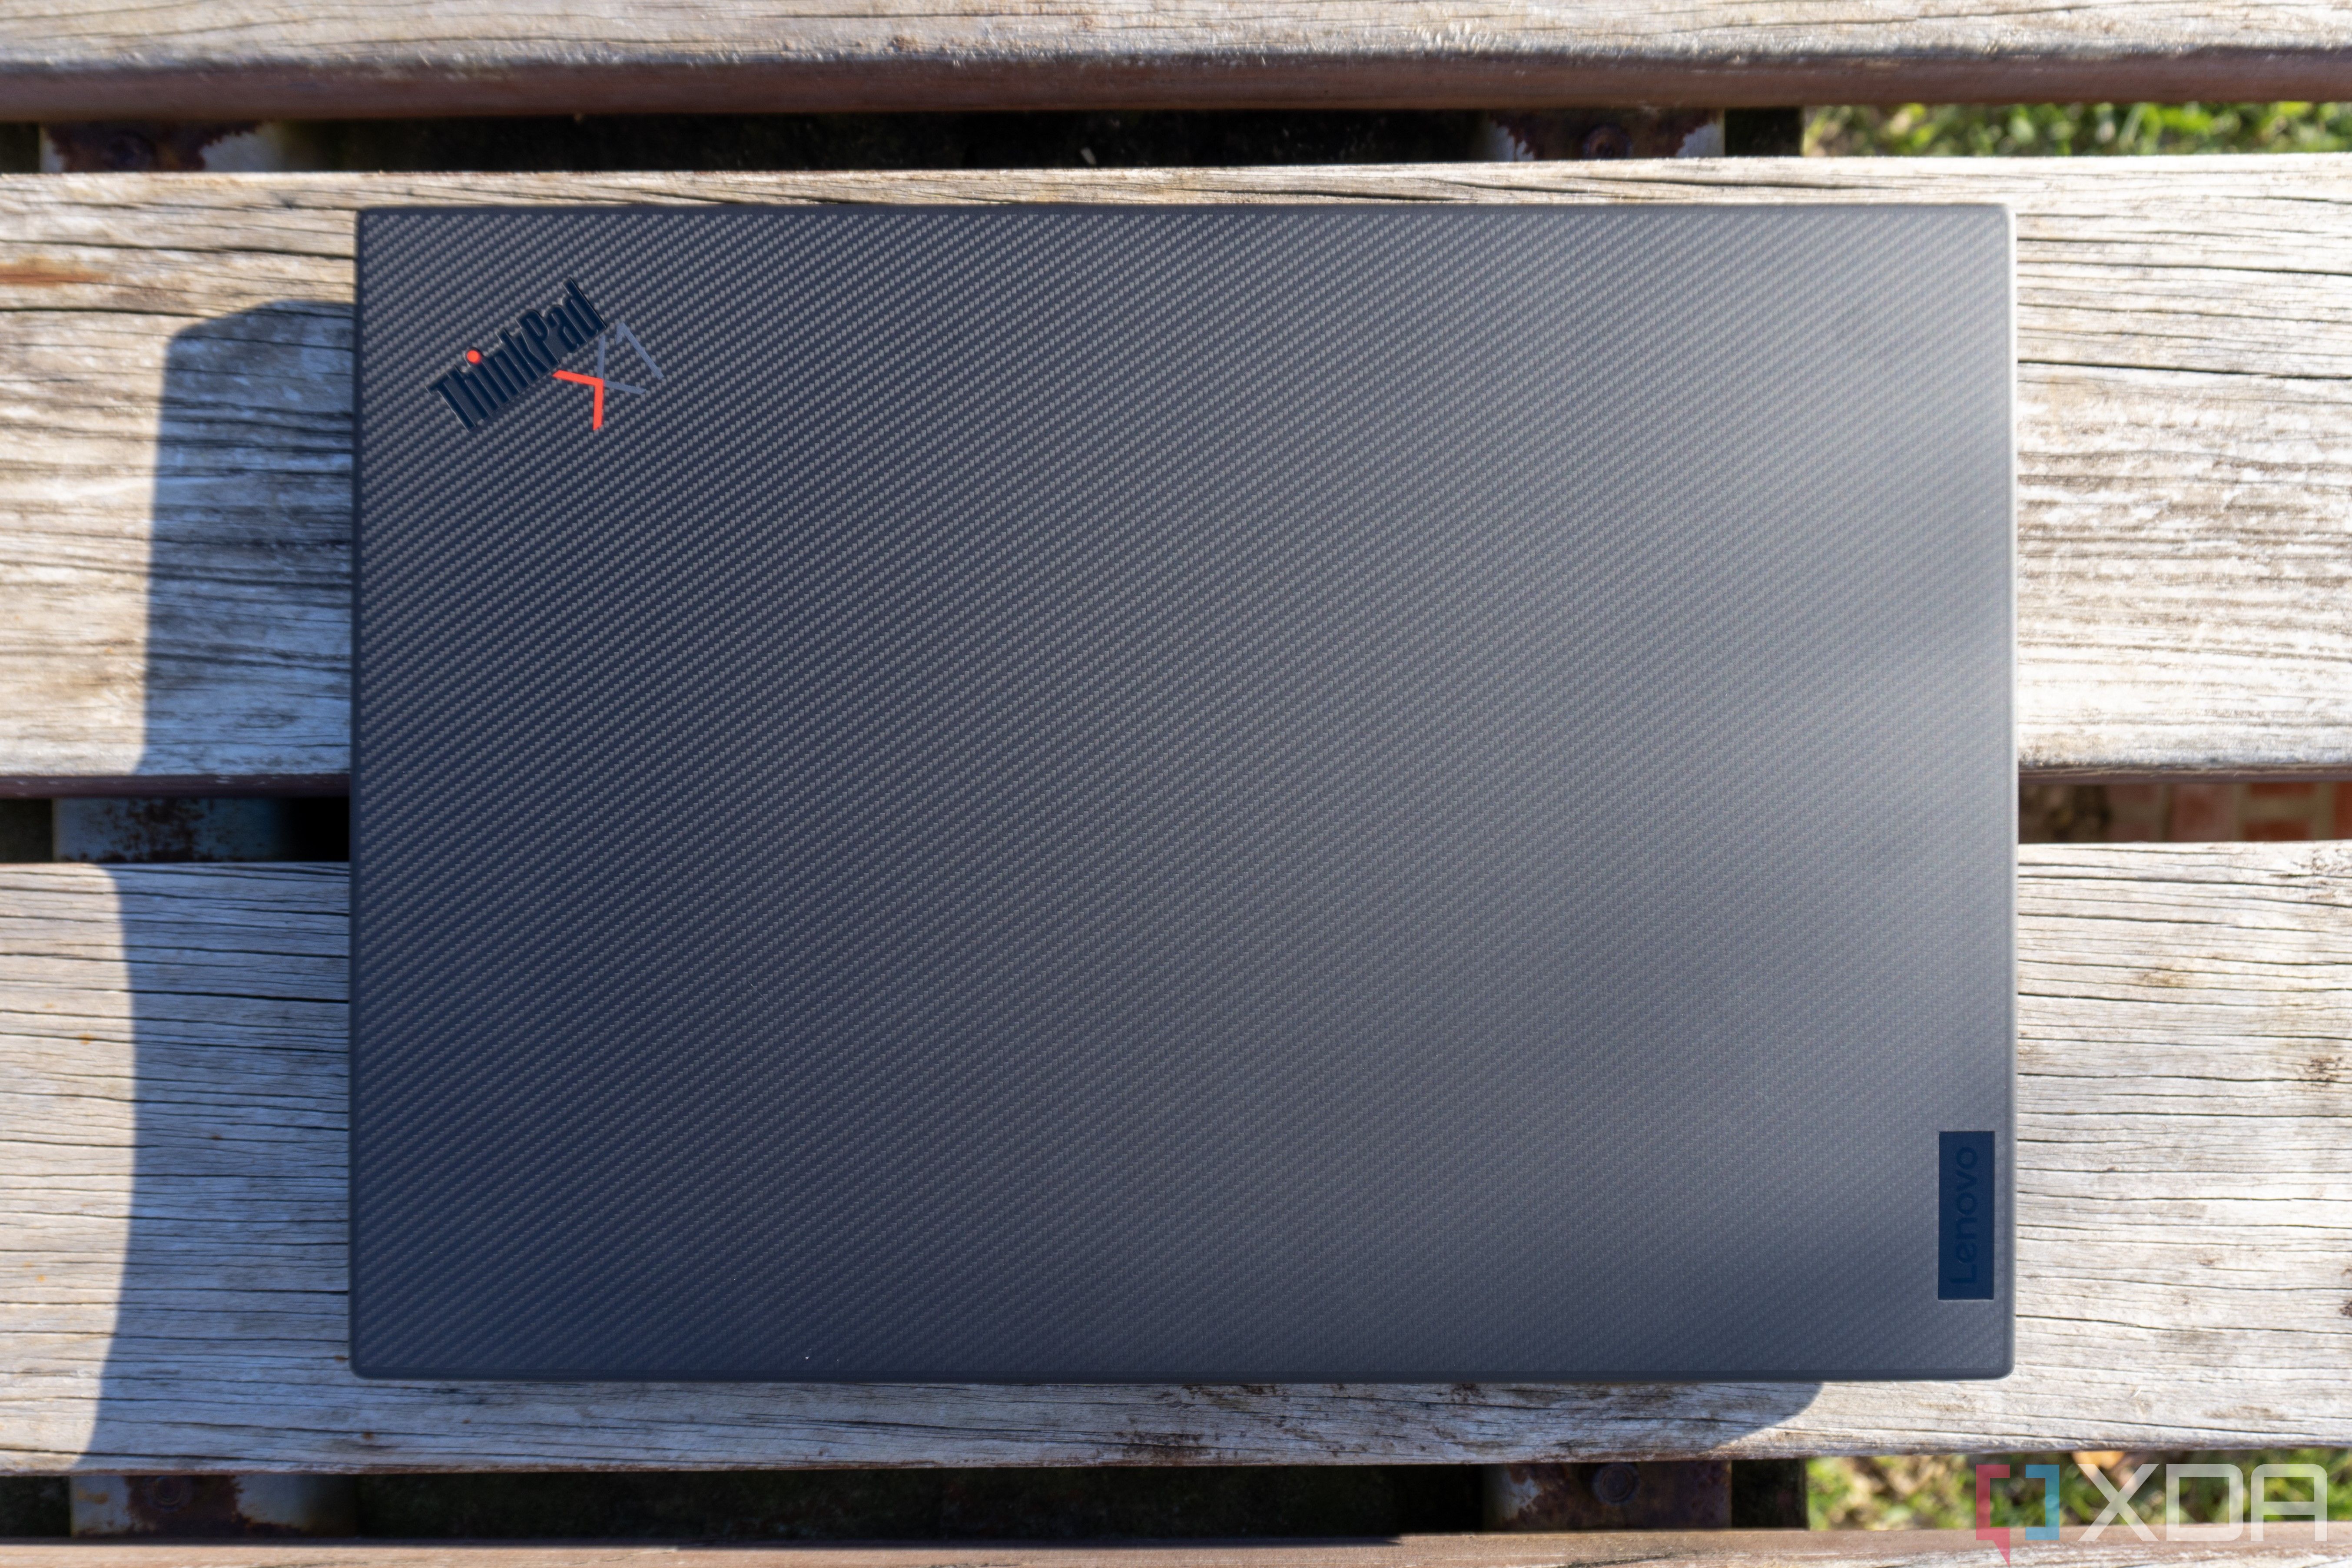 Overhead view of the Lenovo ThinkPad X1 Extreme Gen 5 laptop with the lid closed, showing the carbon fiber pattern on the lid, along with a Lenovo logo in the bottom right corner and a ThinkPad X1 logo in the top left